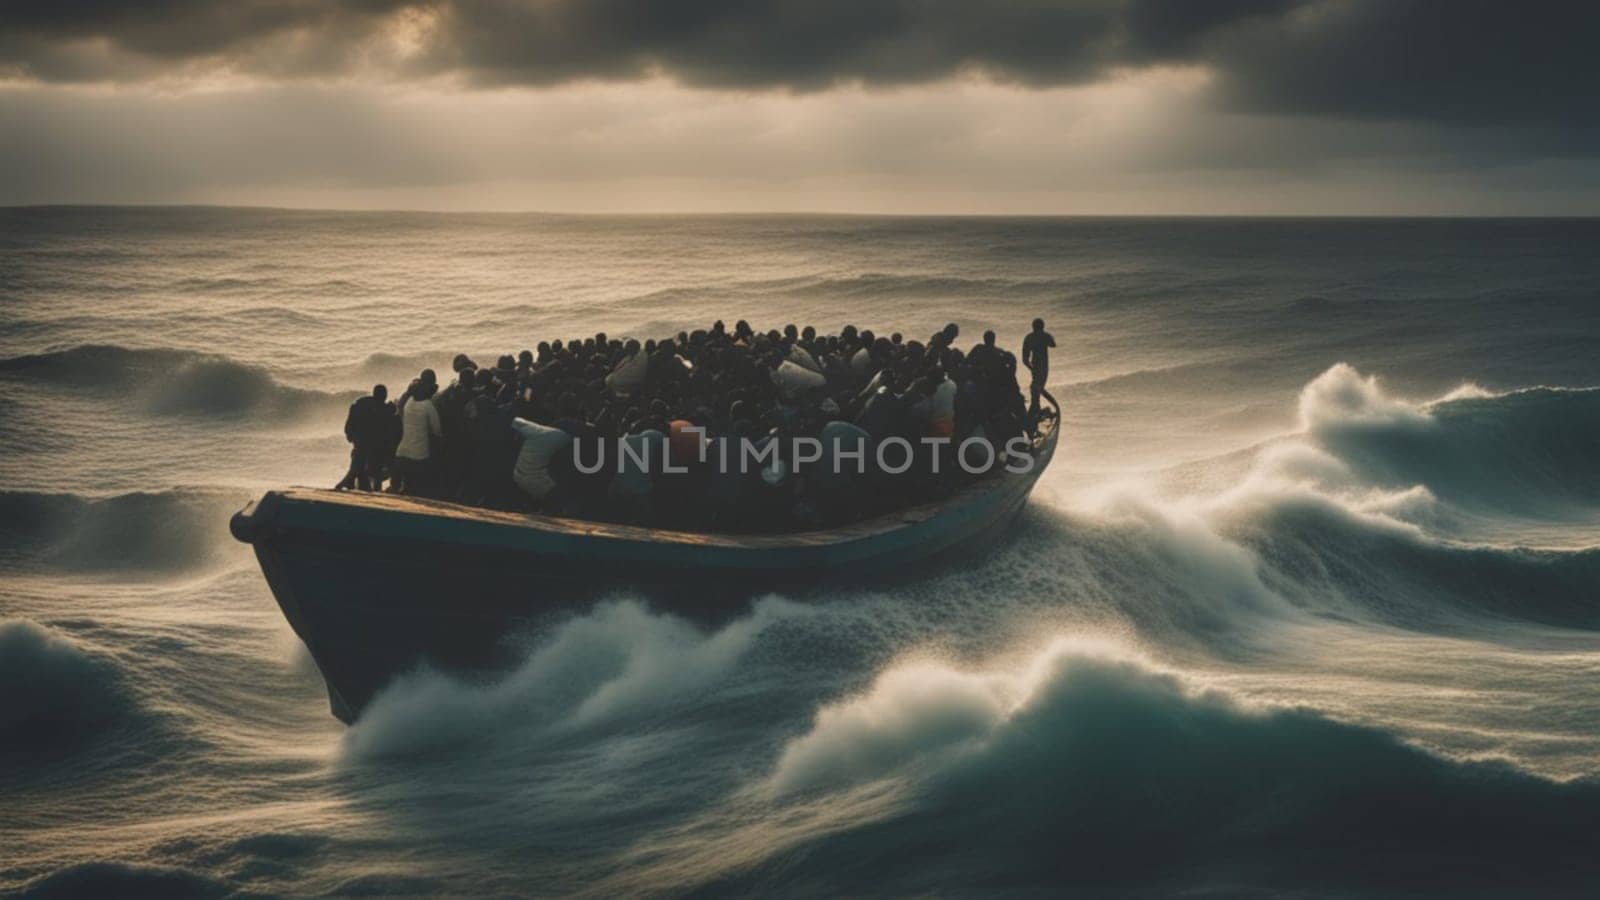 african migrants lost in a dangerous storm in mediterranean sea, risking life, dreaming of bright future in Europa